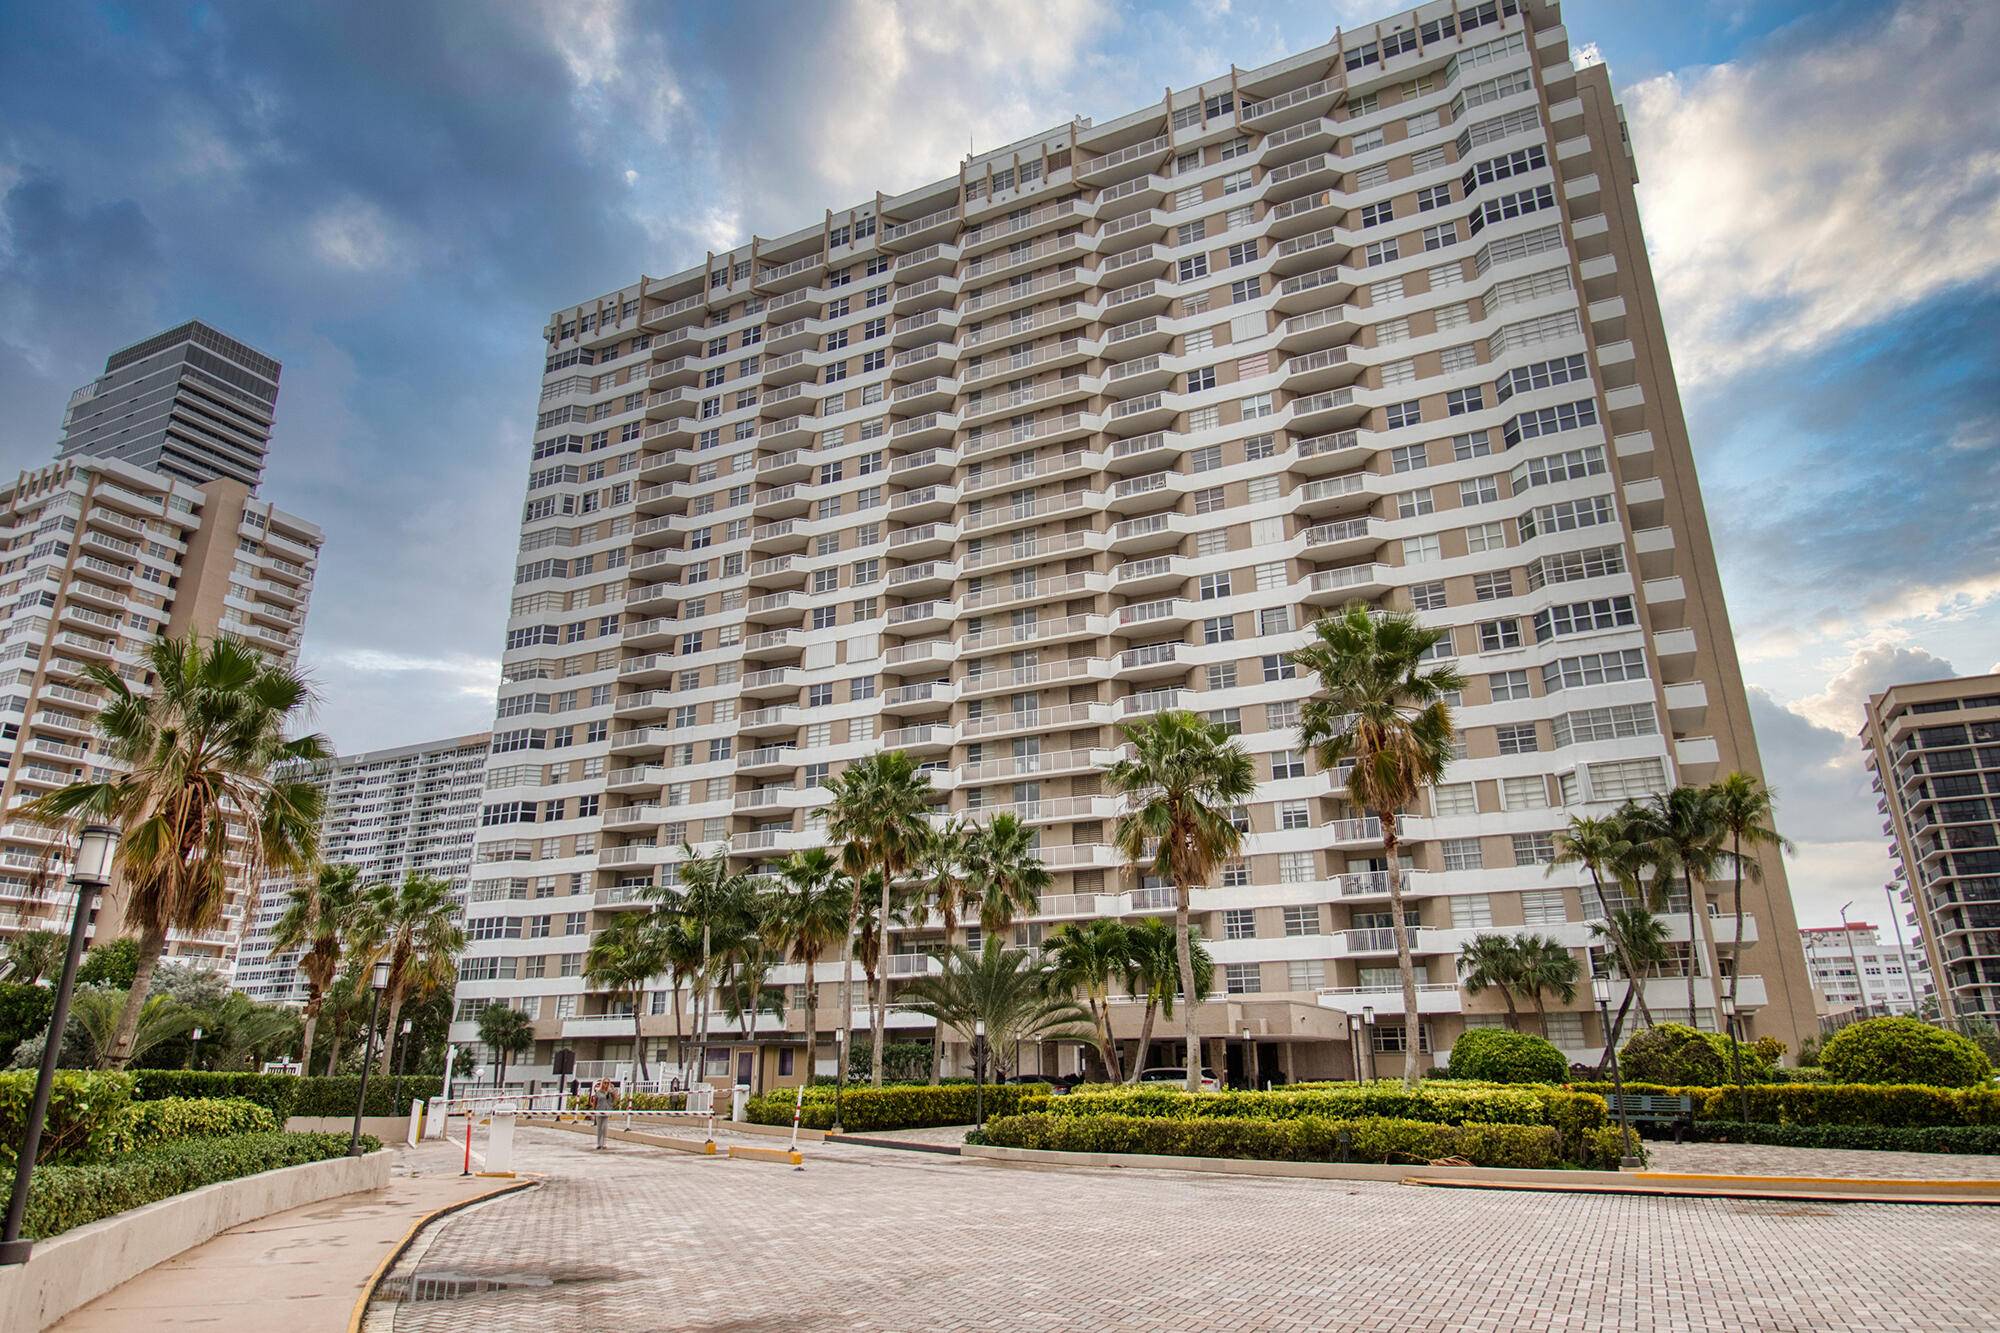 Watch the sun rise set from this resort style condominium located in the heart of Hallandale Beach at the intracoastal and across from The Hemisphere's secluded beach.